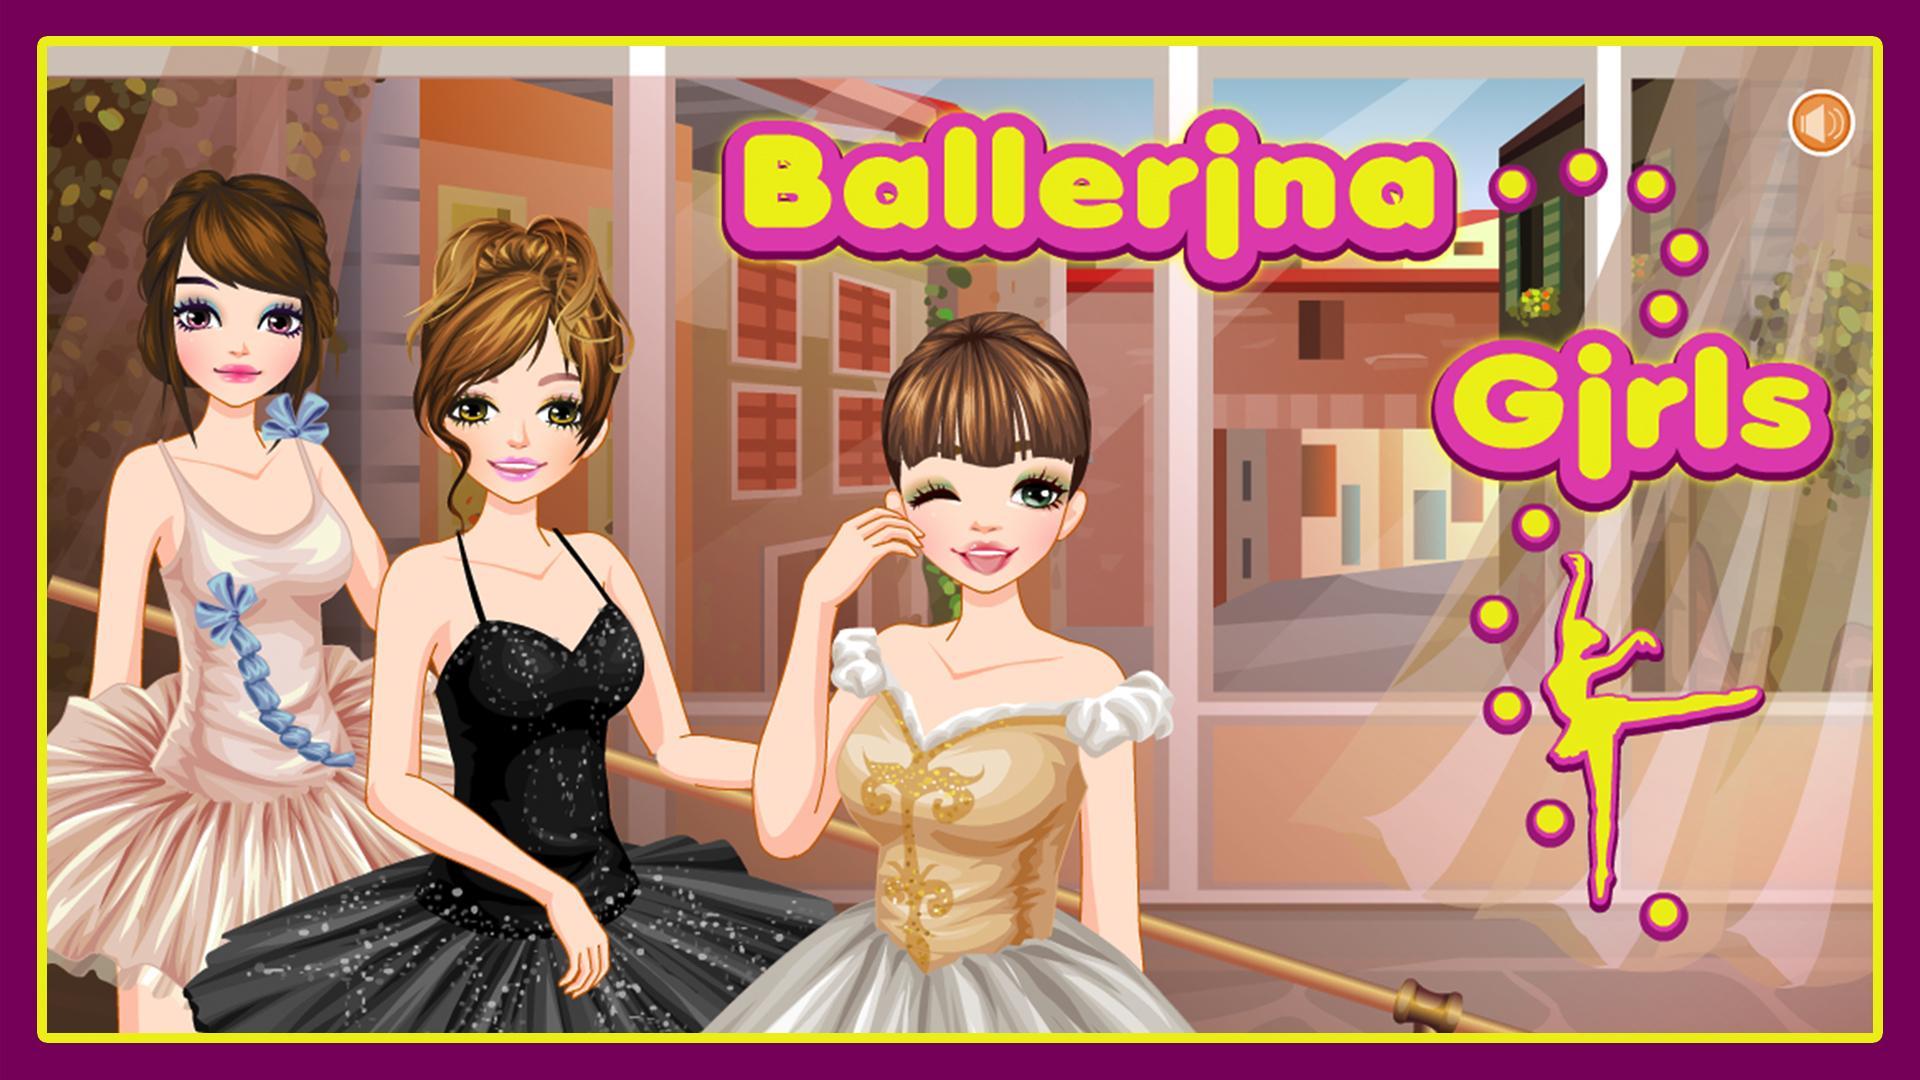 Ballerina Girls Dress up games for Android - APK Download